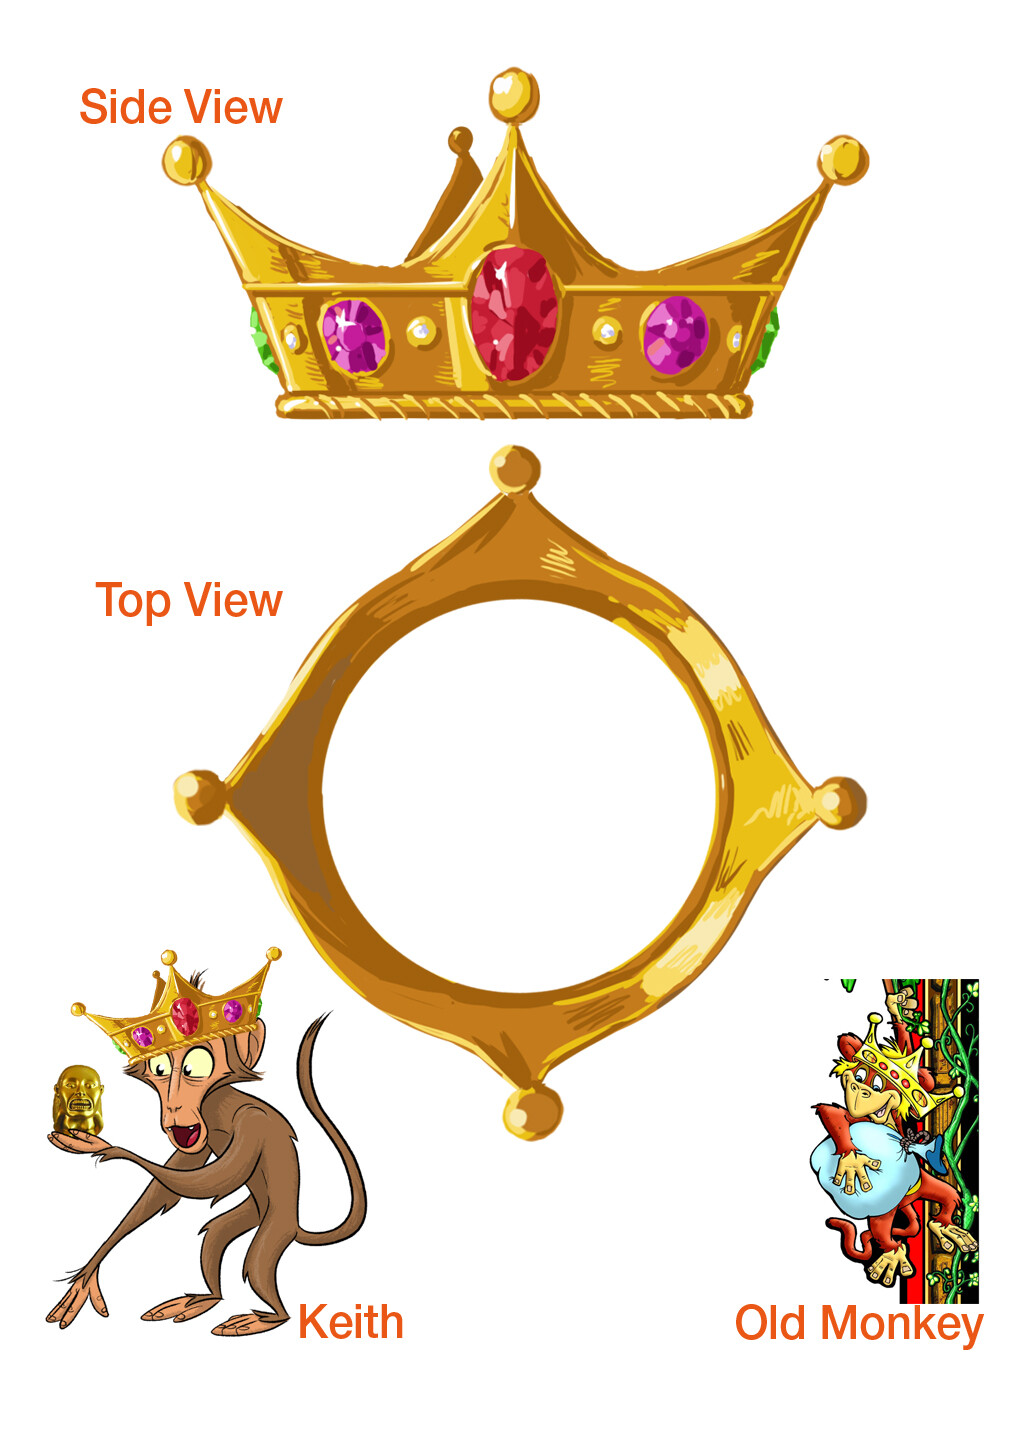 Worked with another artist to help update the old monkey design. and painted up the crown as a guide for the 3D artist.